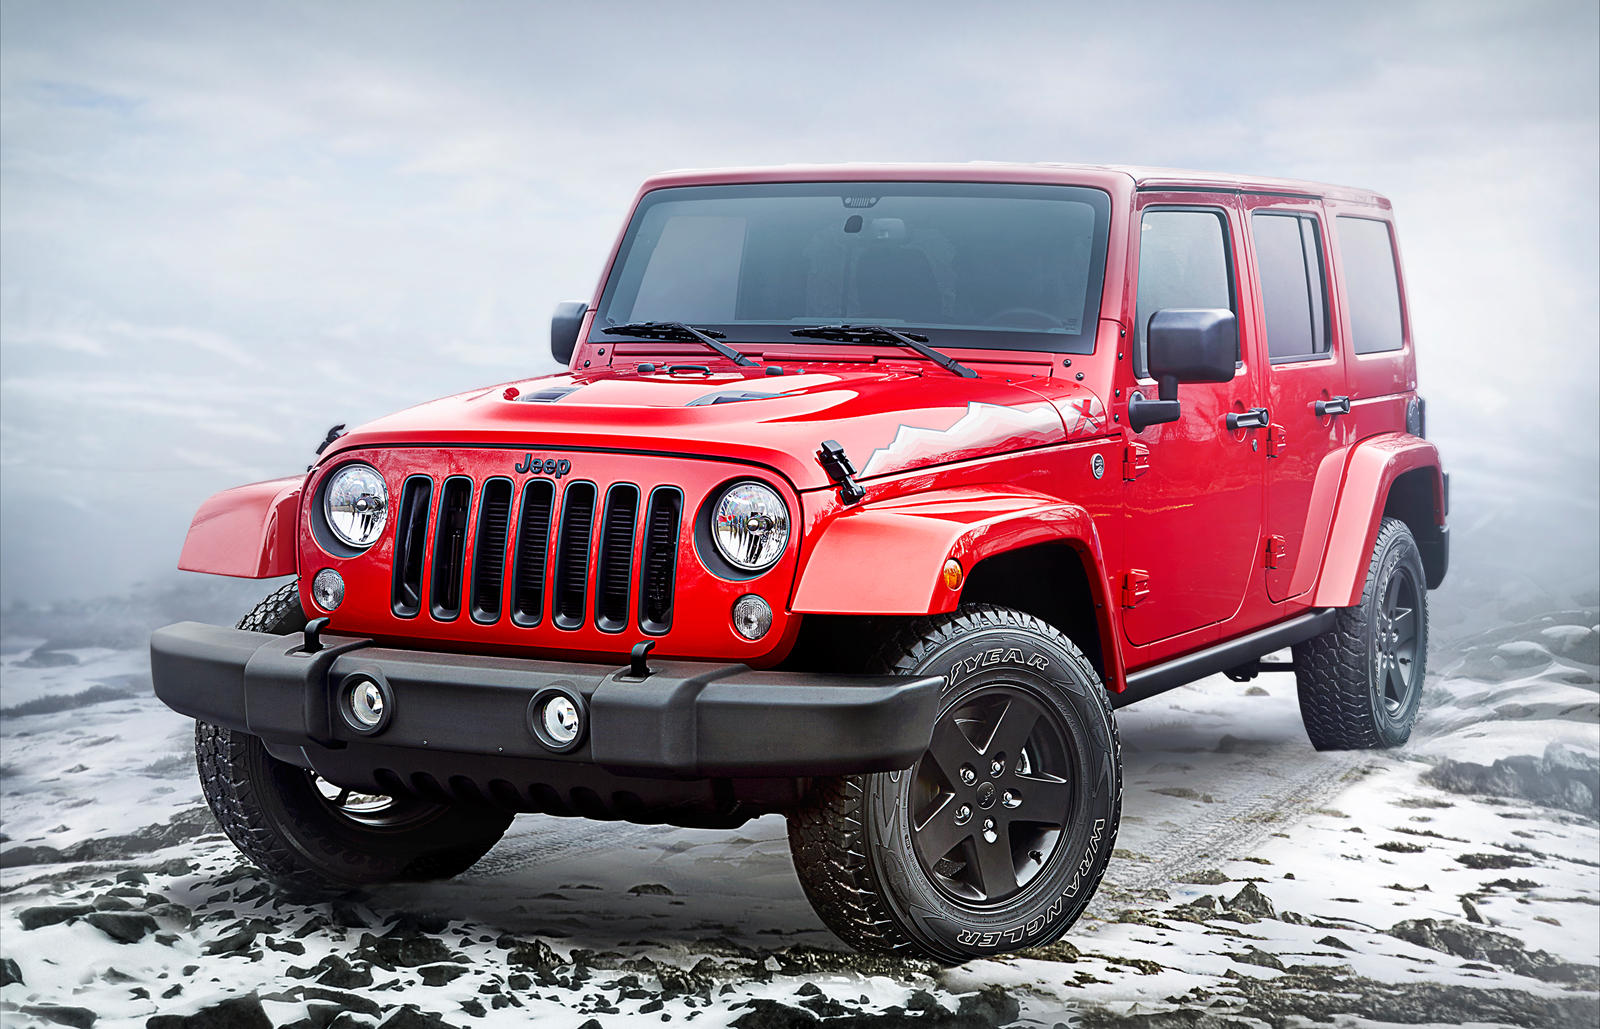 2017 Jeep Wrangler Unlimited Review, Trims, Specs, Price, New Interior